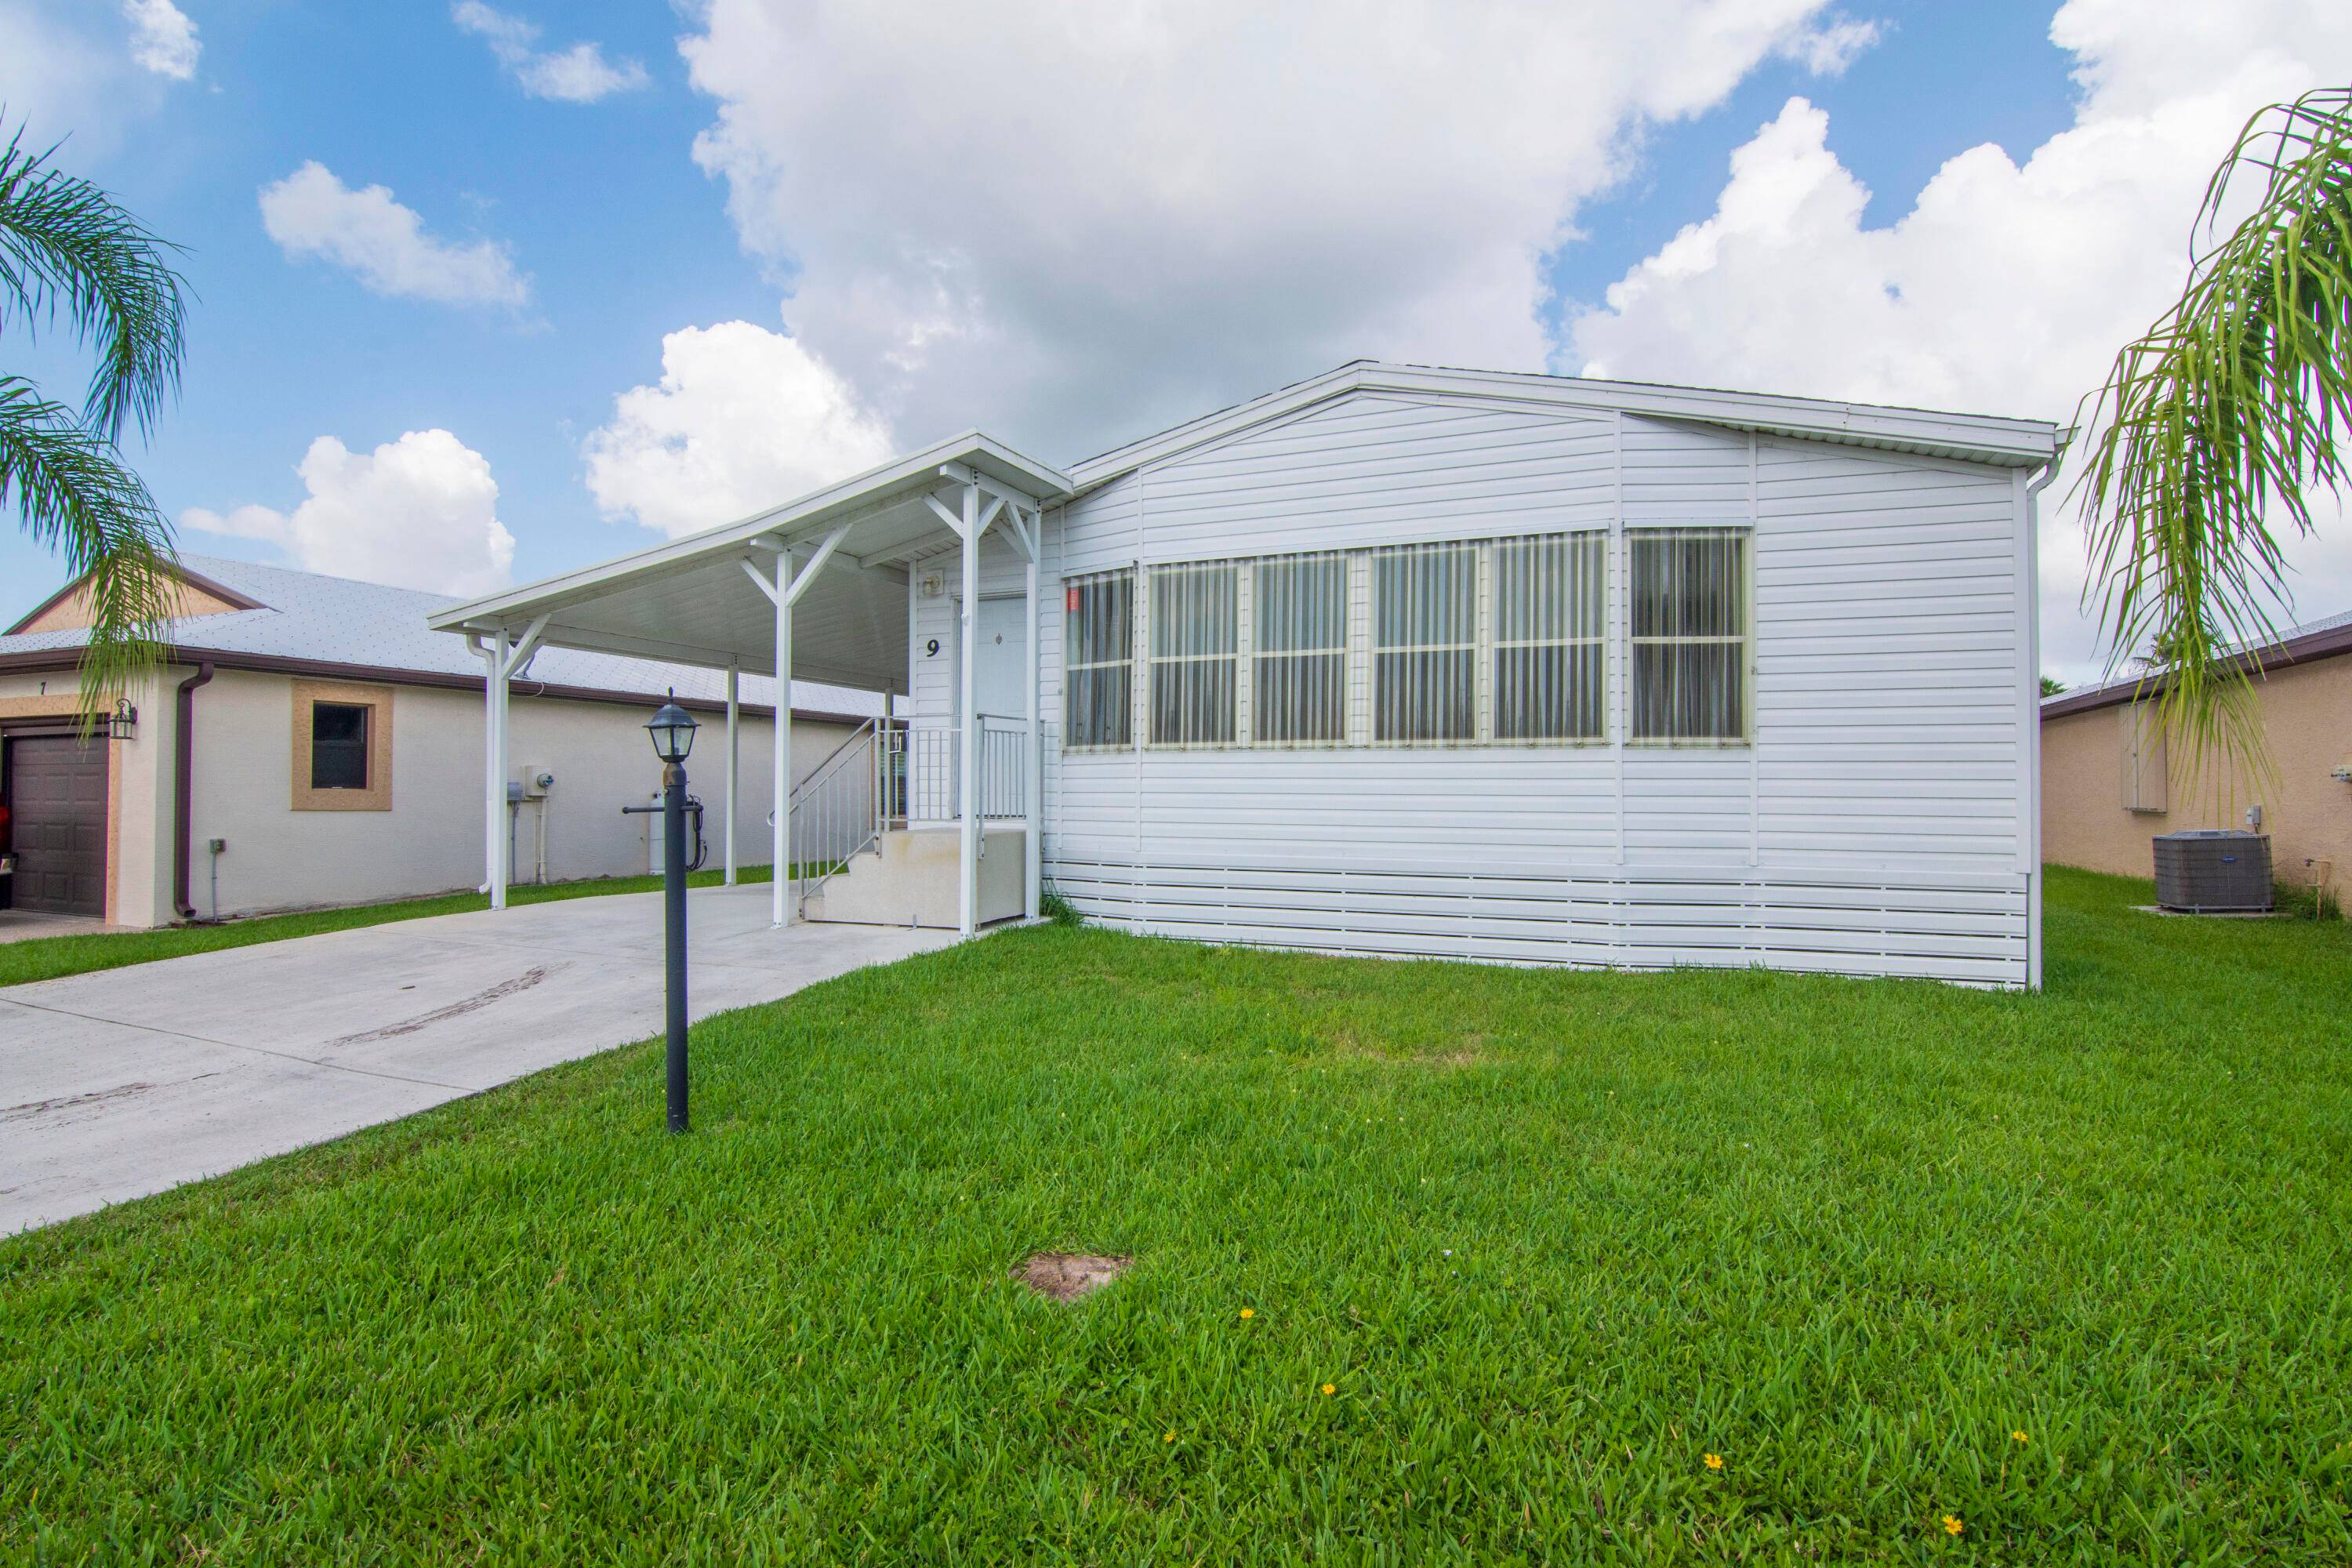 Come See This 2 Bedroom, 2 Bathroom Mobile Home located in a quiet, active 55 community with lots of amenities, including a swimming pool, clubhouse, Golf Tennis and much more.